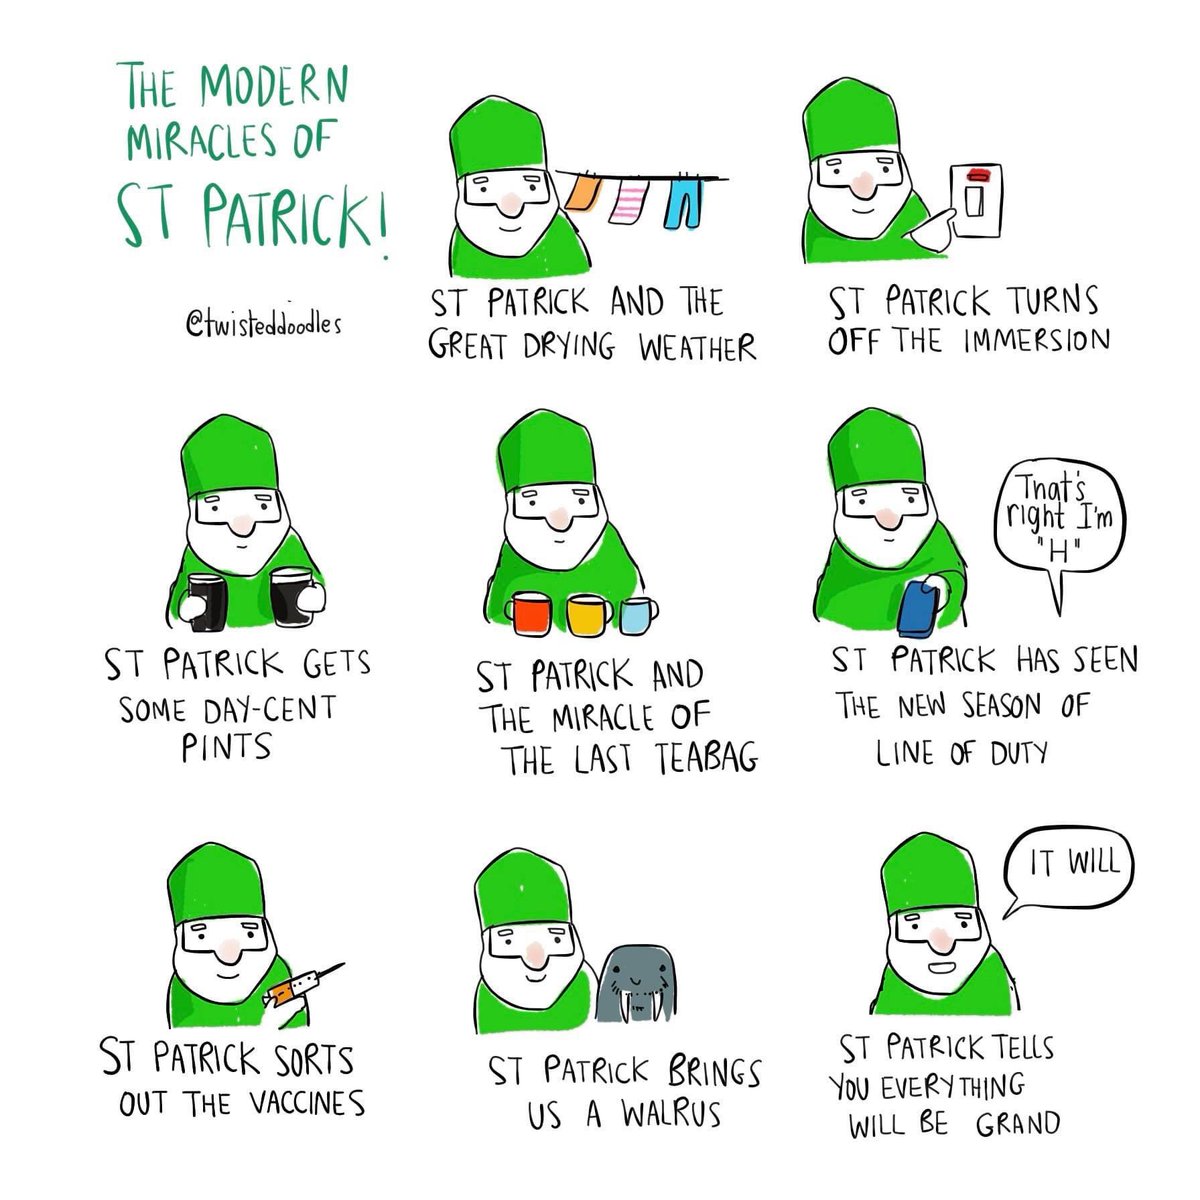 A wee message on St Patrick’s eve thank you @twisteddoodles for this! #DerryGirls @irishabroad @Derryvisitor